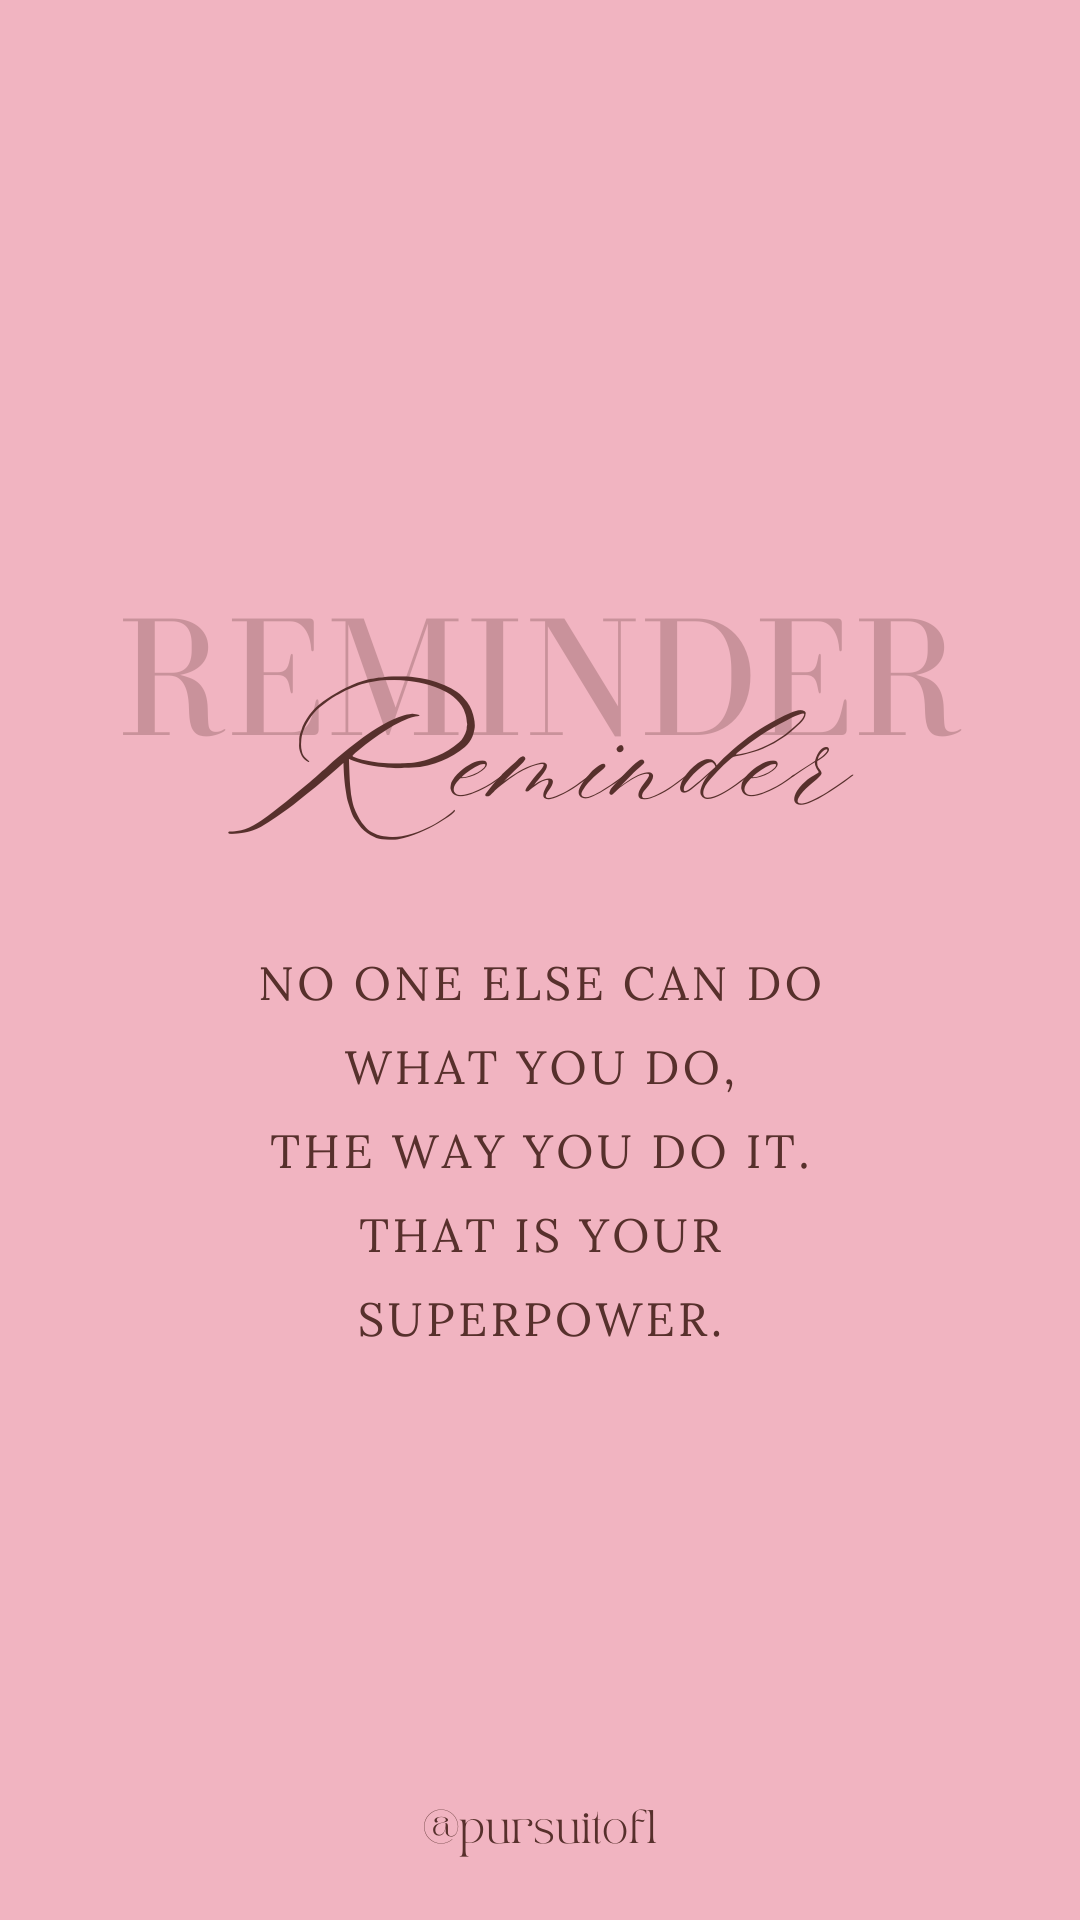 Pink phone wallpaper with inspirational reminder quote that reads no one else can do what you, the way you do it. That is your superpower.